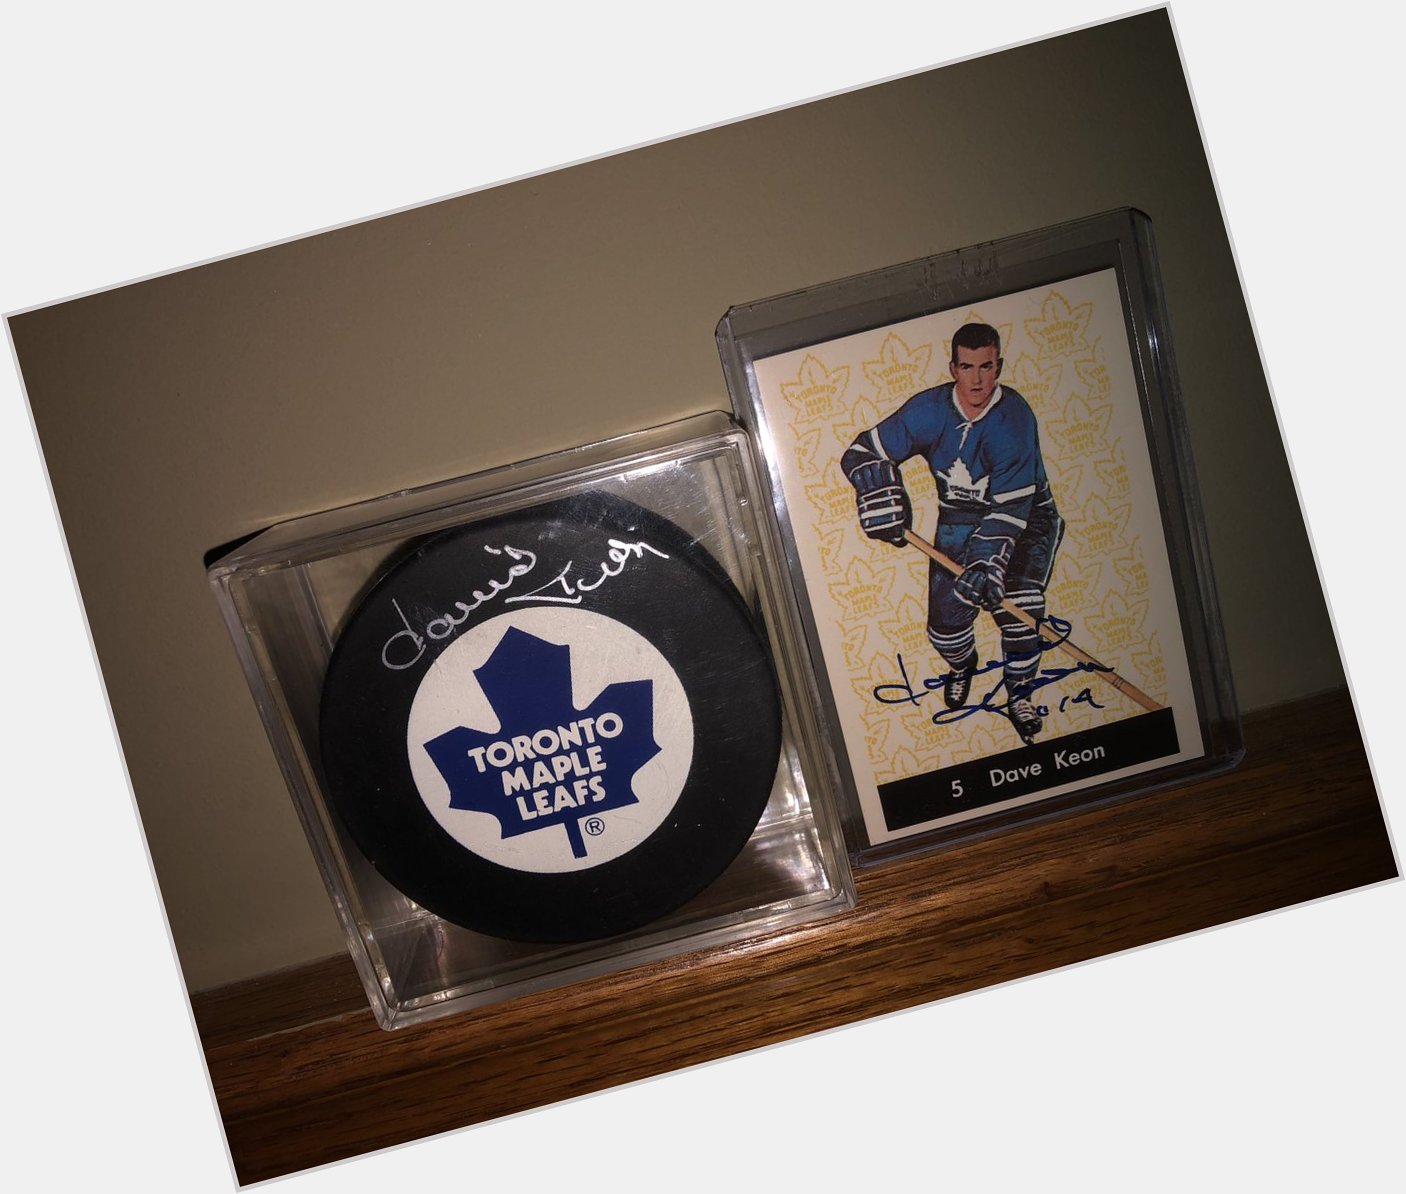 Happy Birthday to the greatest Toronto Maple Leafs player ever. Dave Keon! 